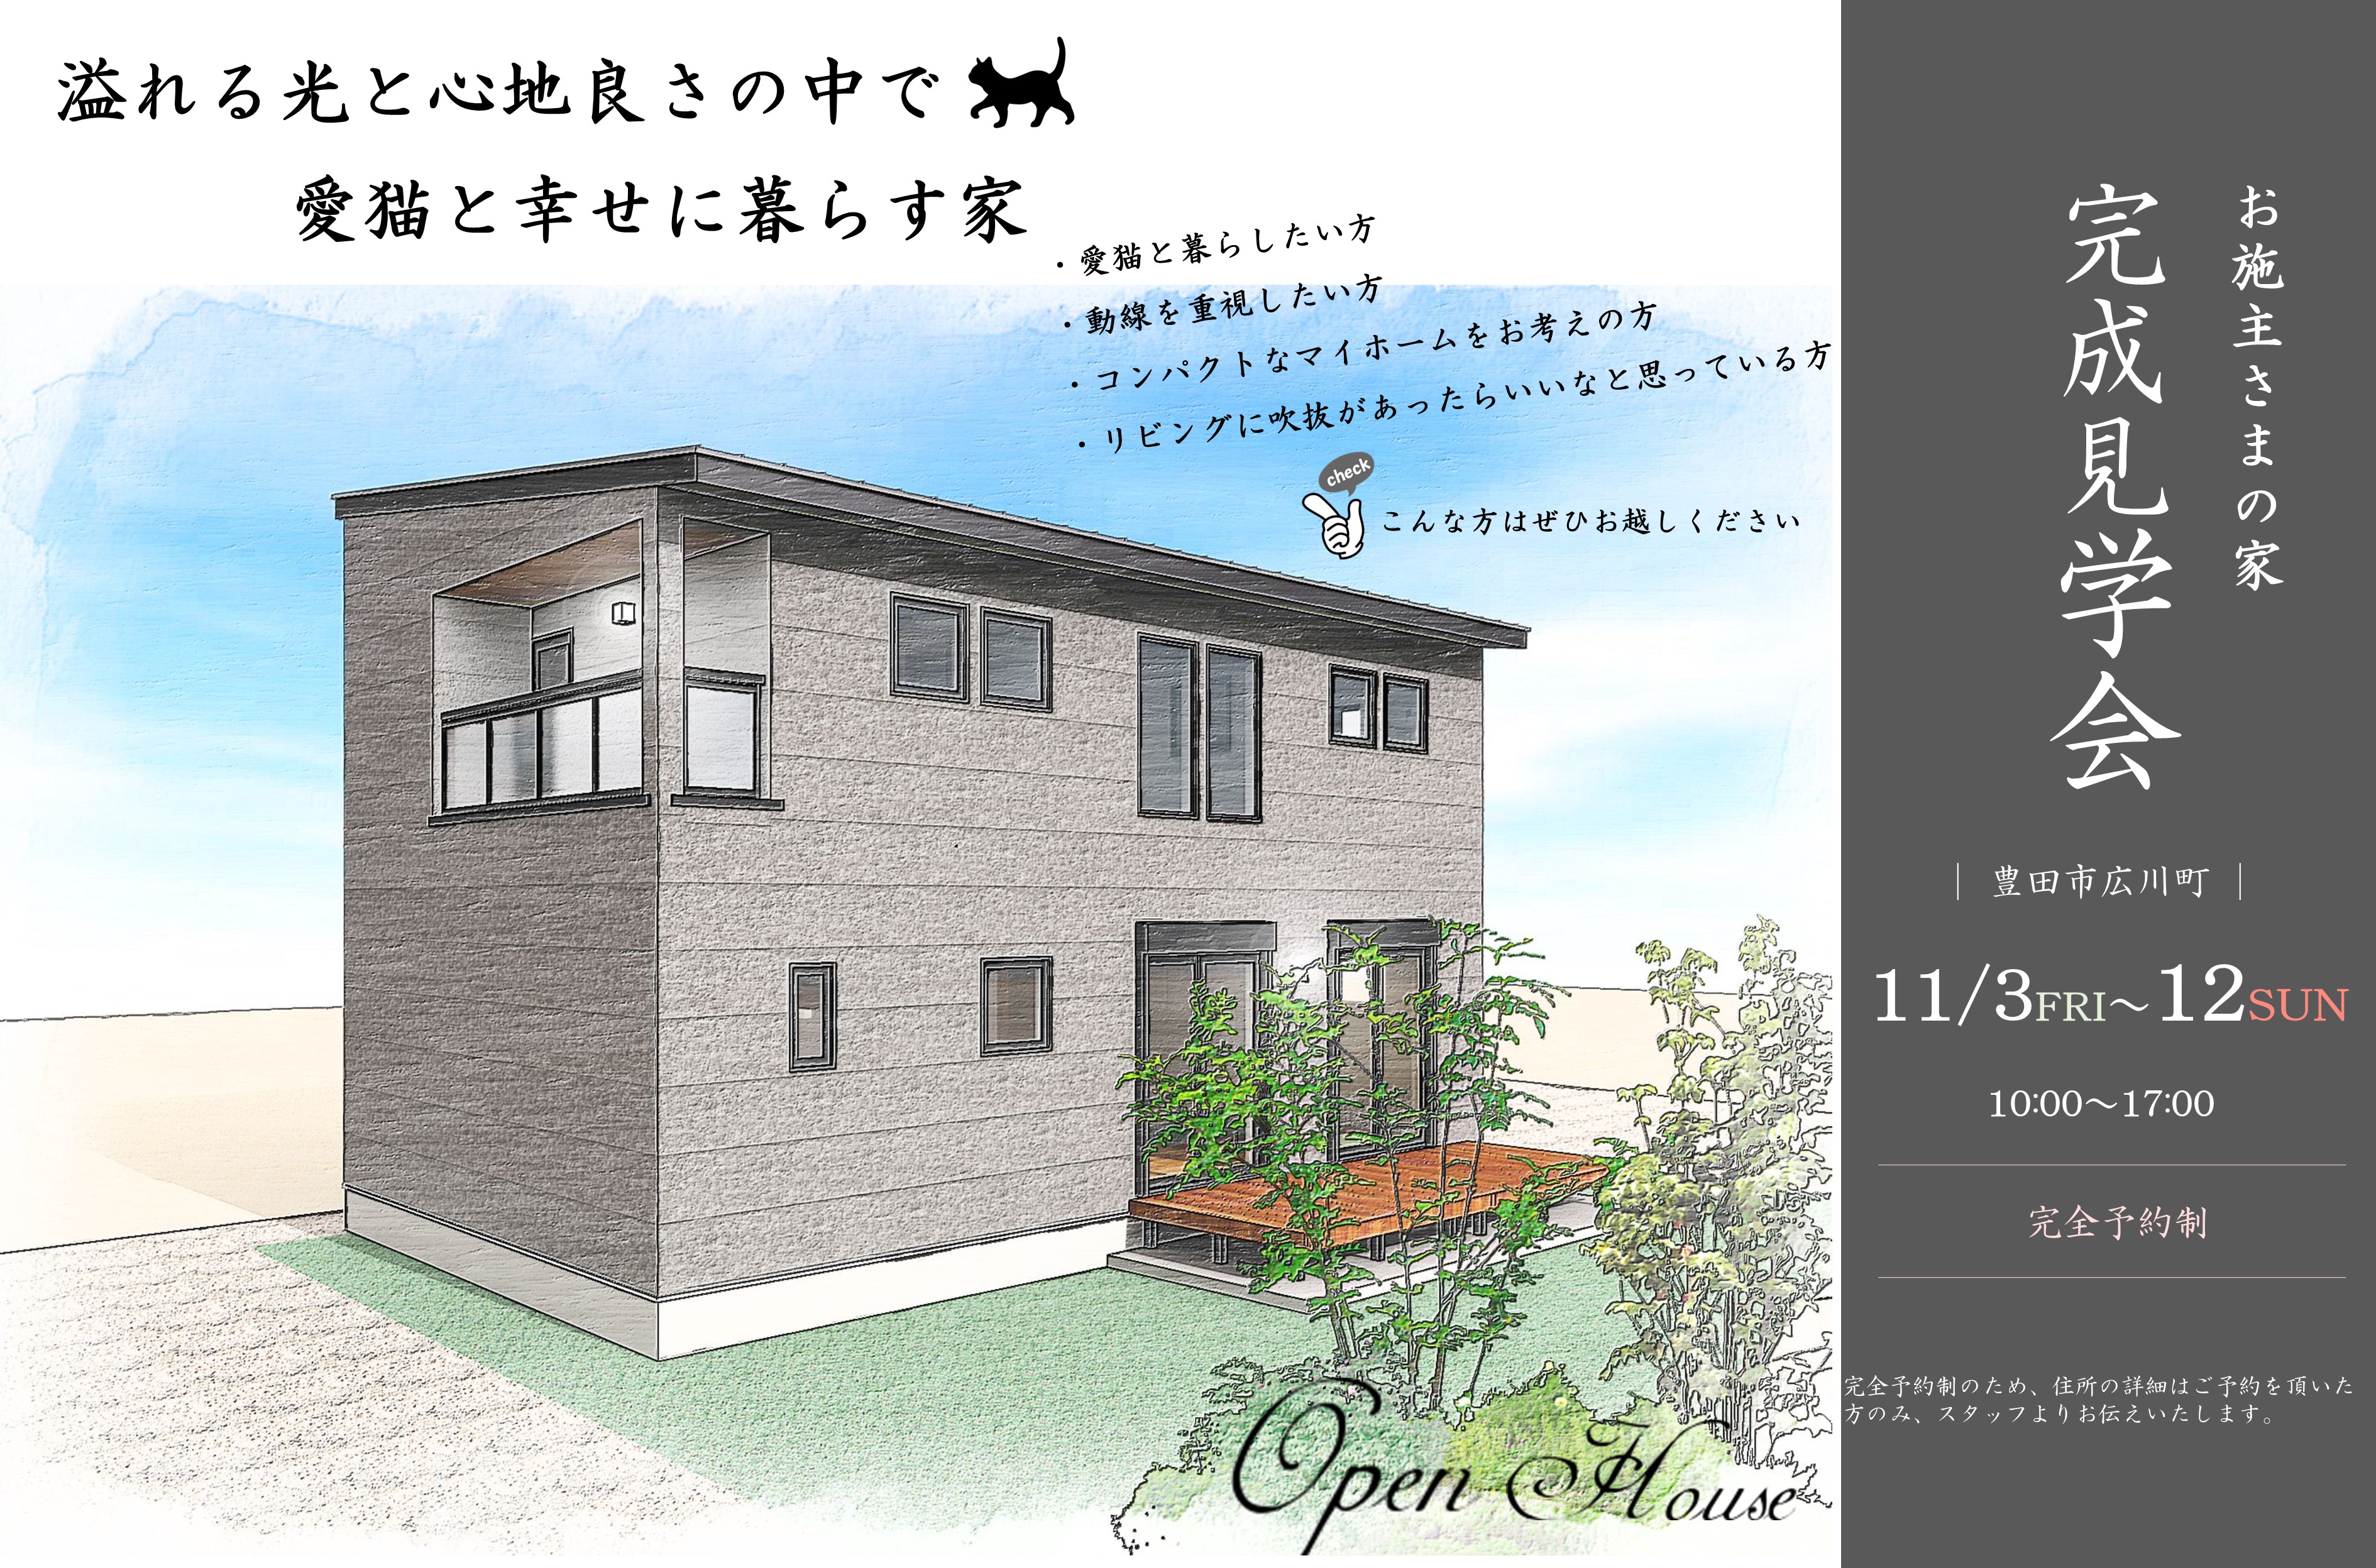 OPEN  HOUSE　－完成編－